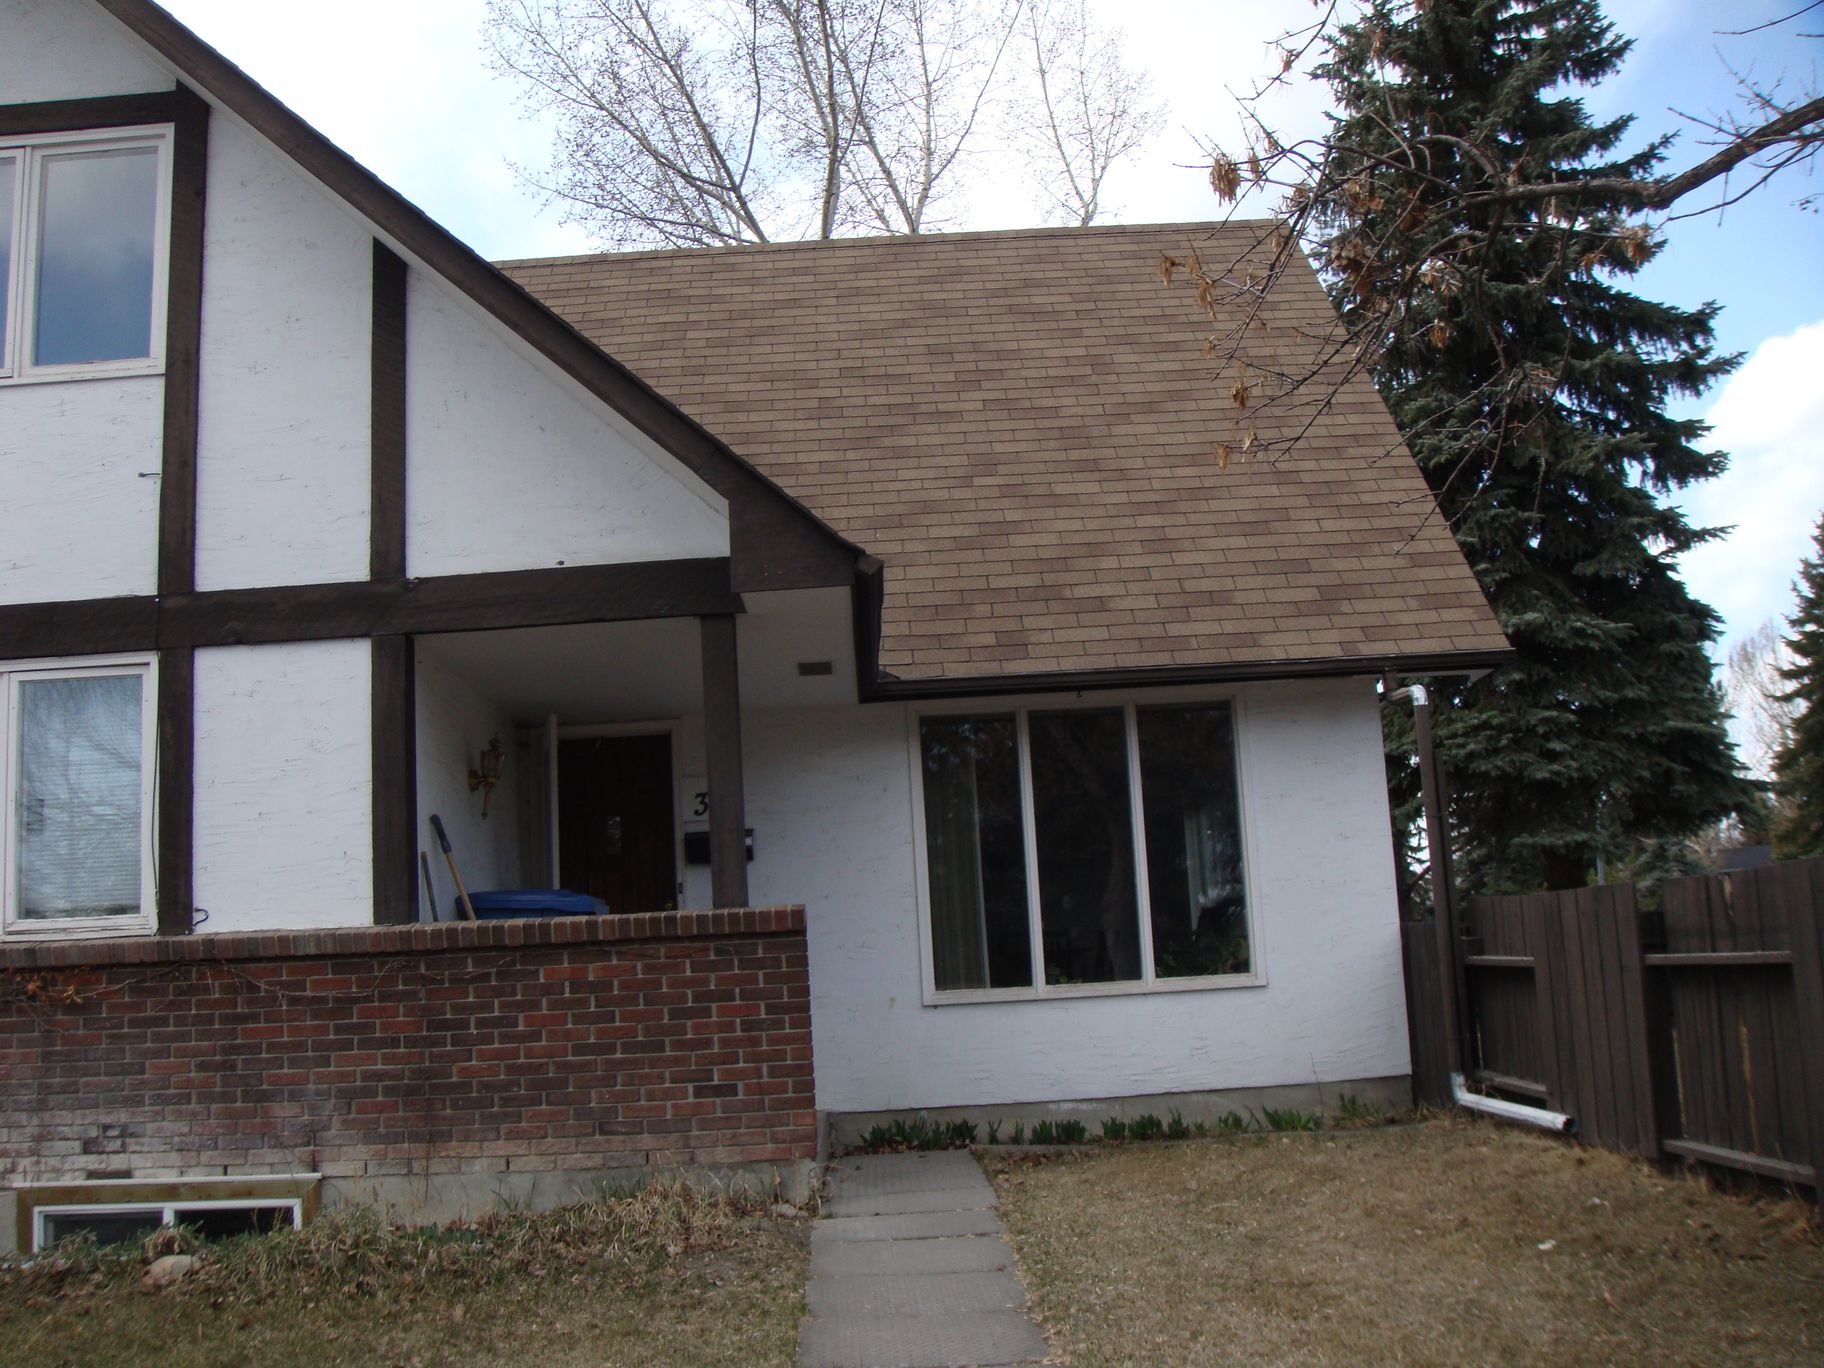 GOOD SIZE 5 BEDRMS HOME LOCATED BY UOFC AND SAIT.